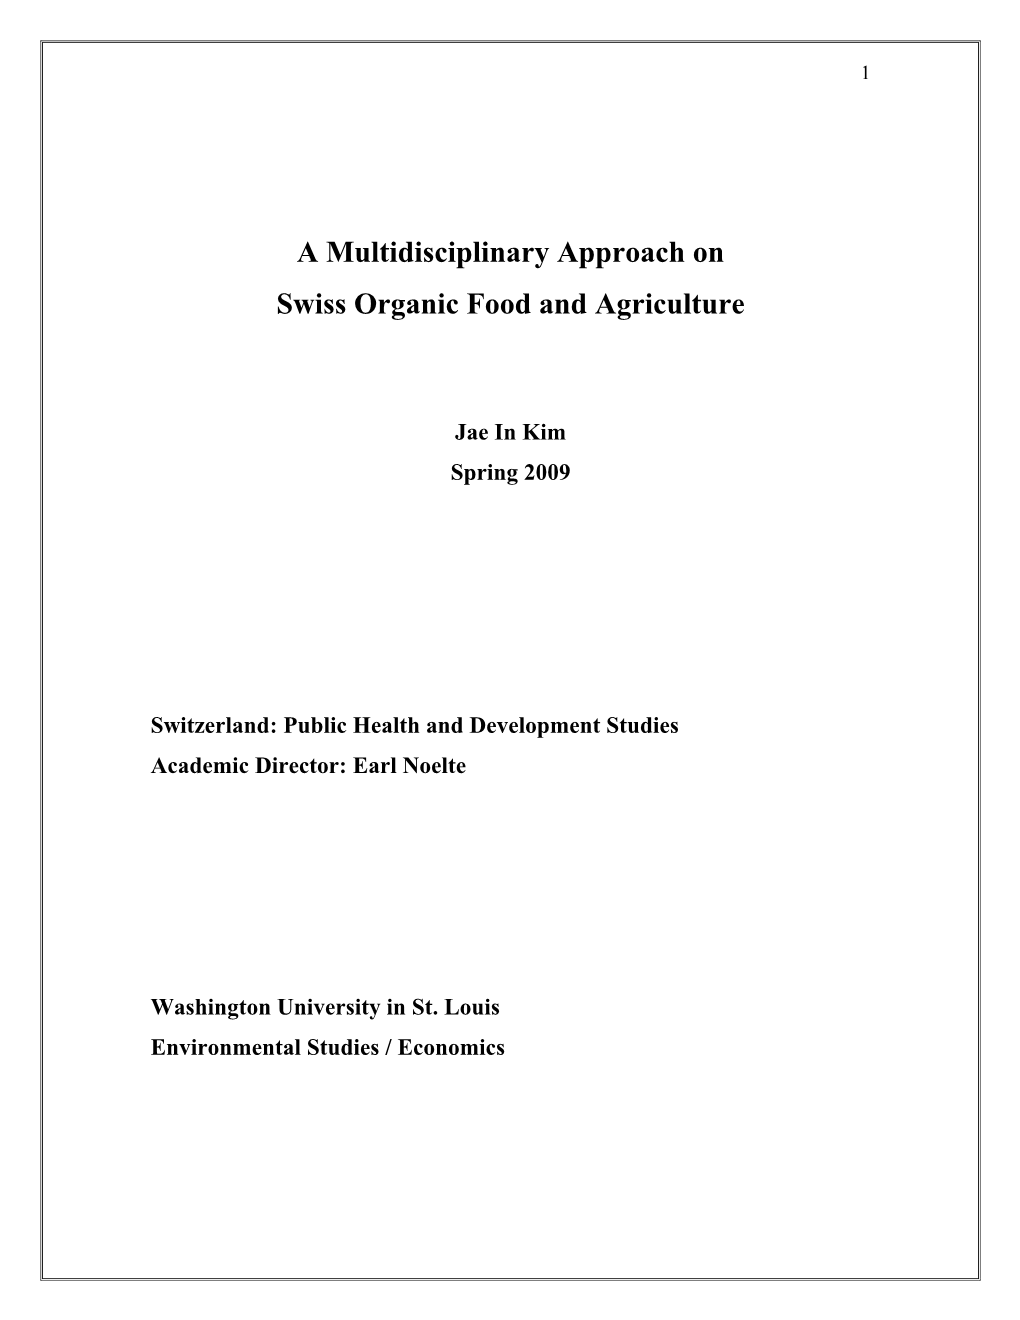 A Multidisciplinary Approach on Swiss Organic Food and Agriculture